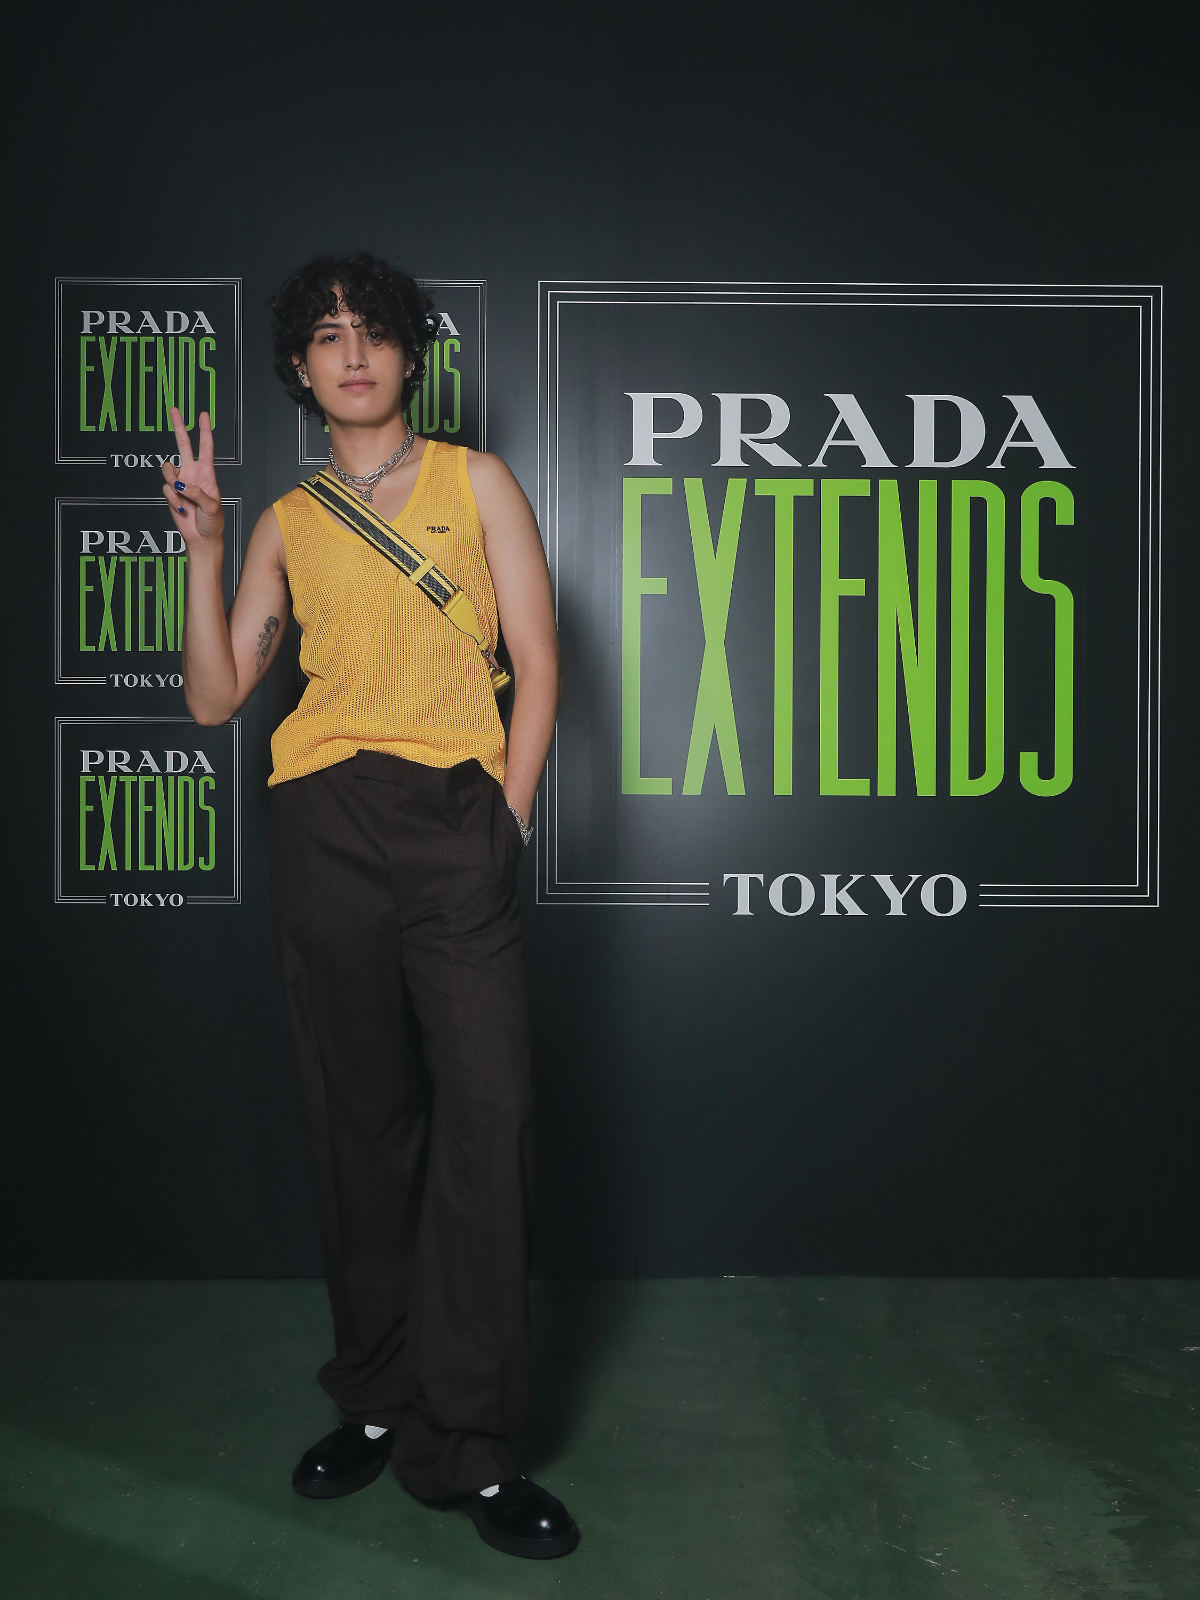 Prada launches new store in Tokyo's Shibuya district - Inside Retail Asia